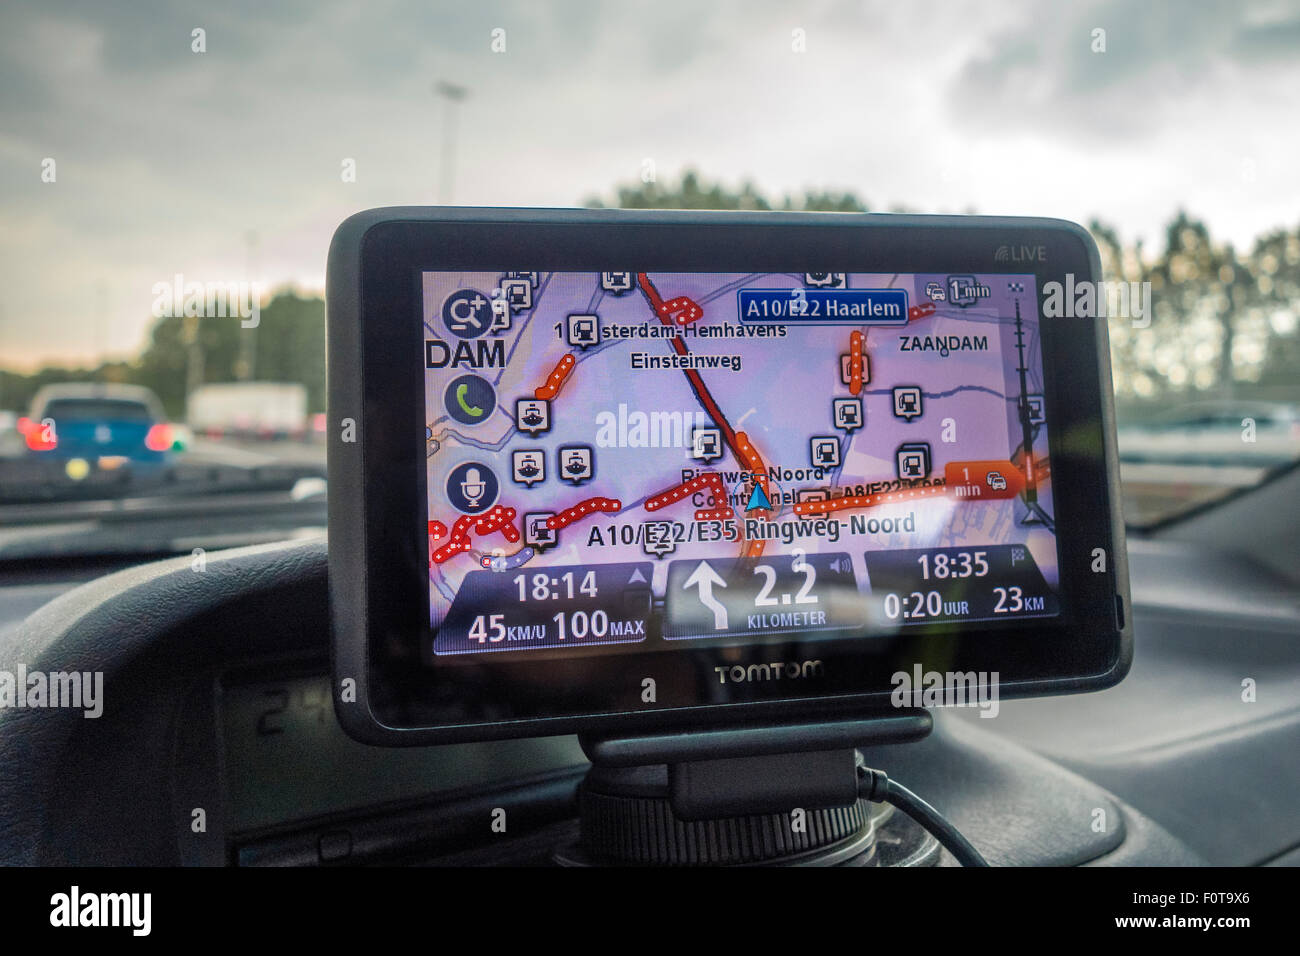 TomTom sat nav, TomTom satnav, satellite navigation showing live traffic information heavy congestion and a way out of traffic jam in Amsterdam Stock Photo